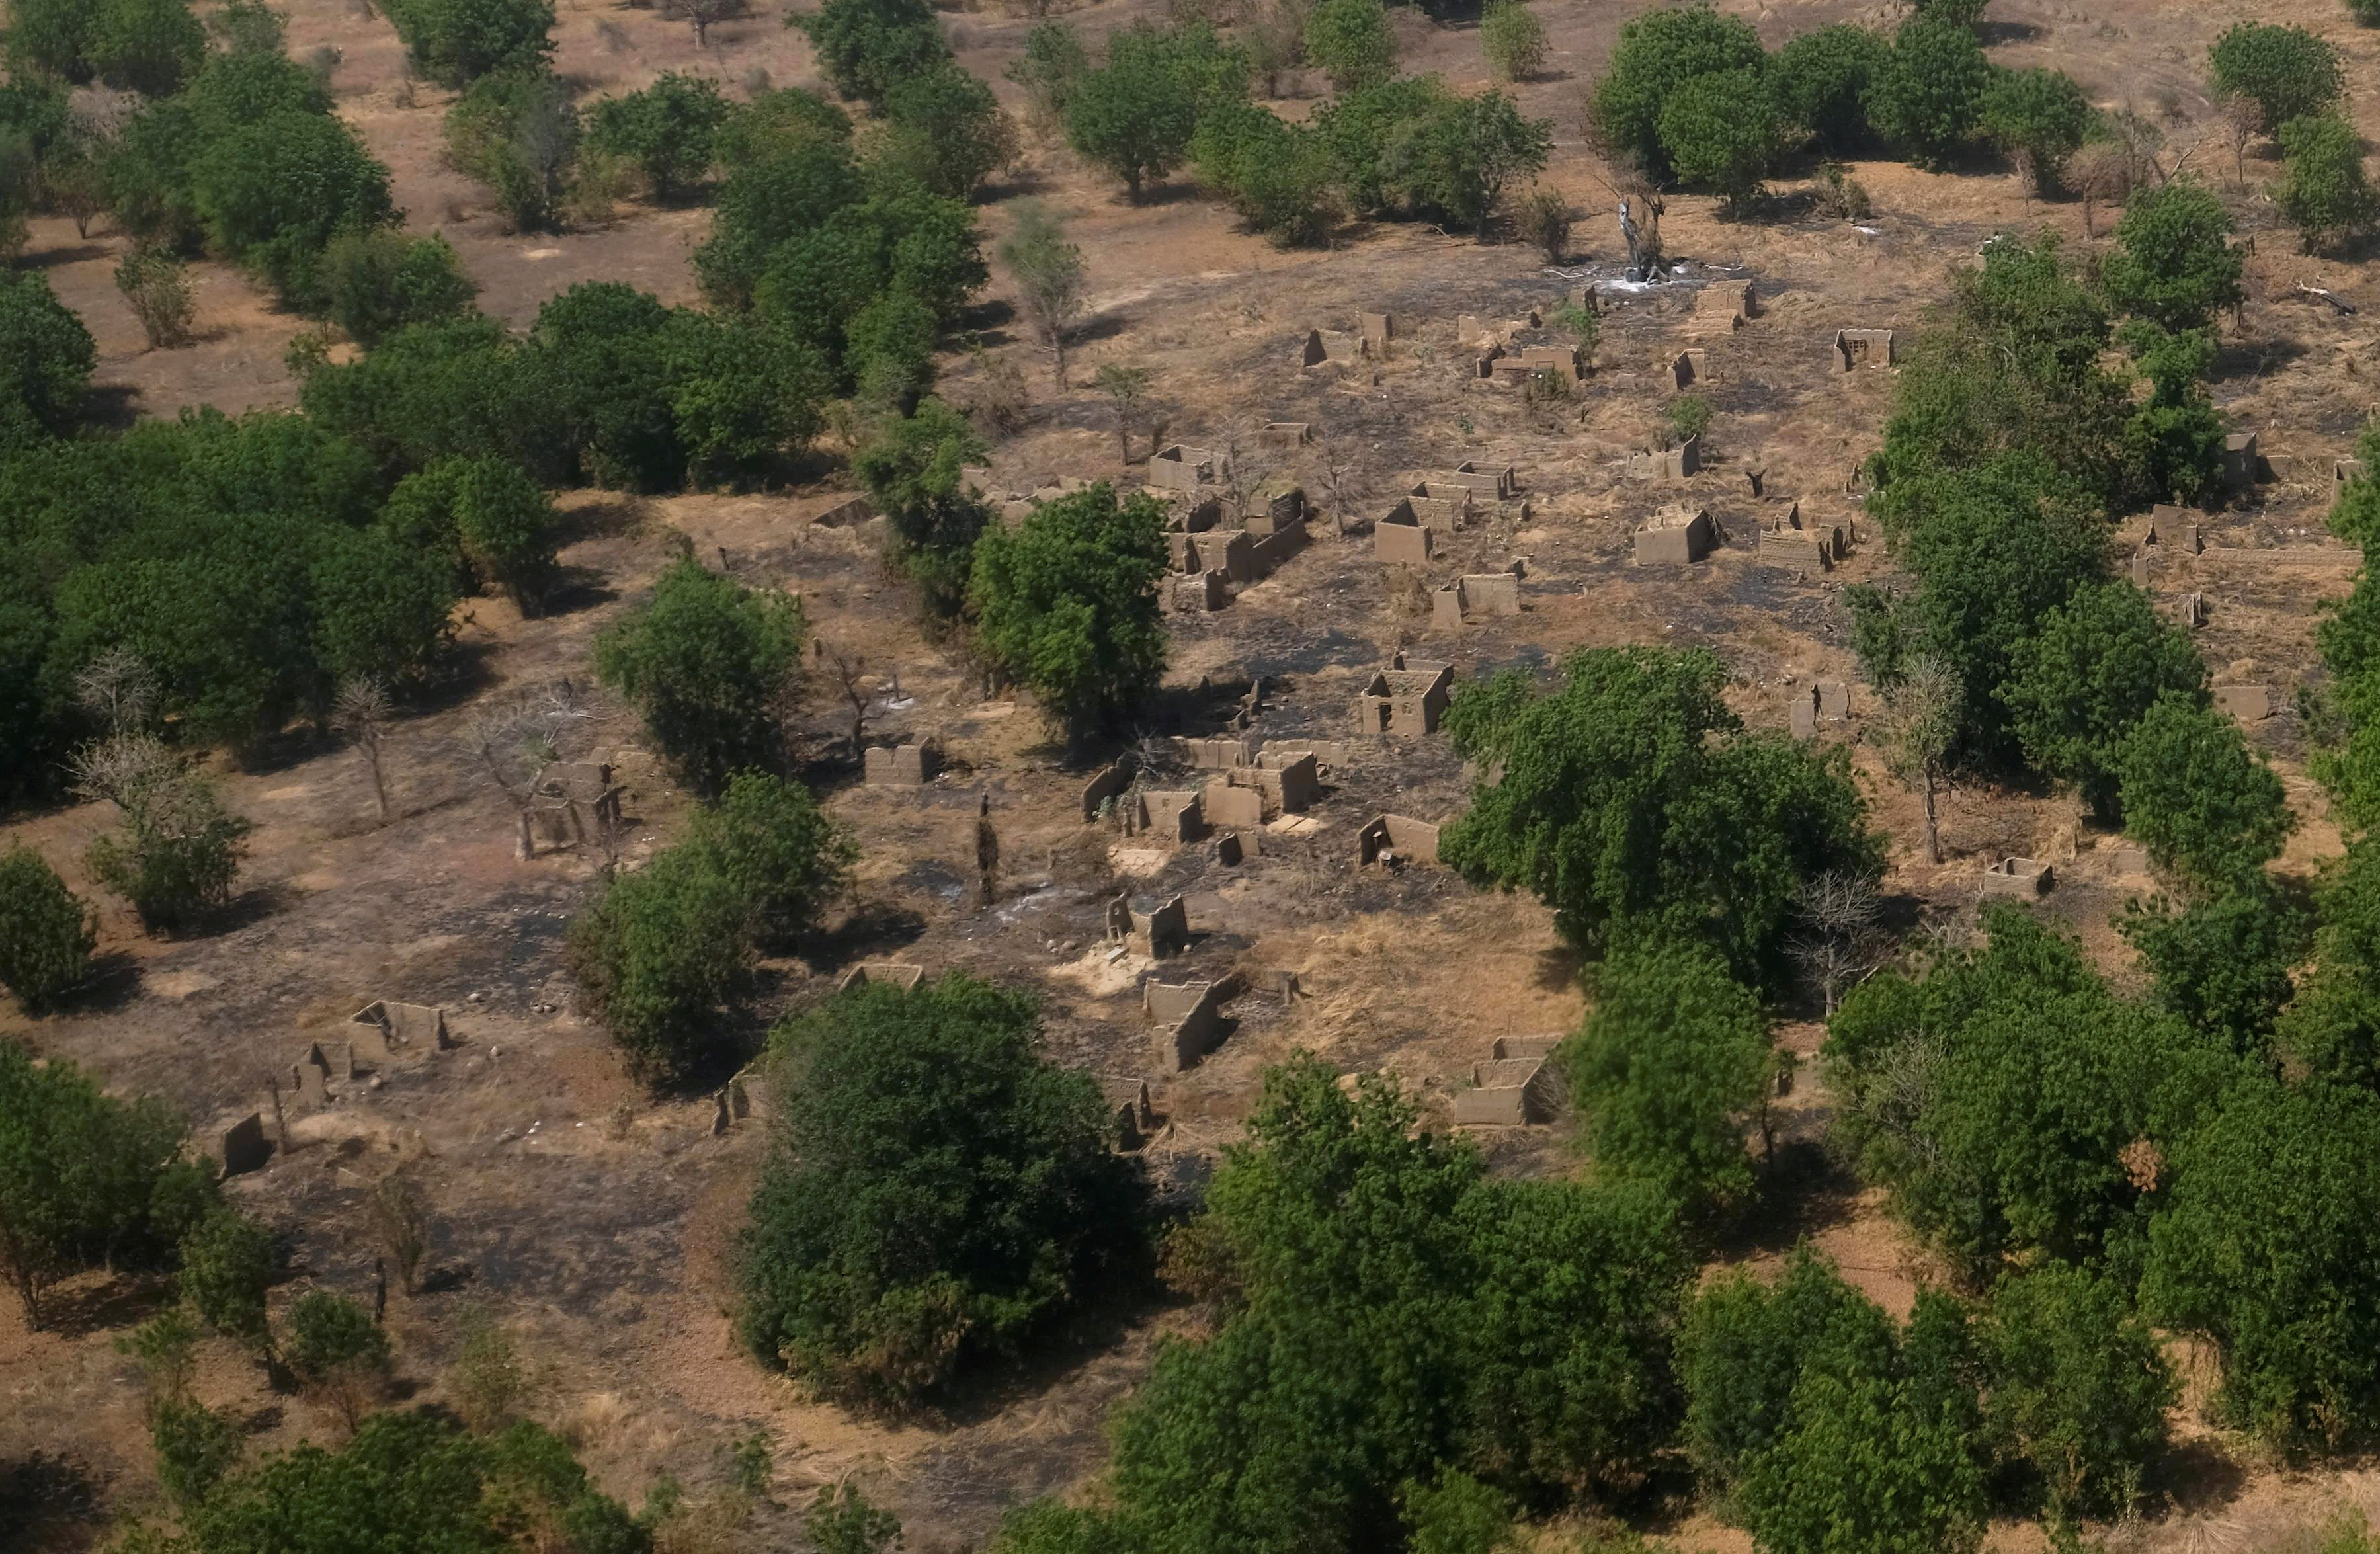 An aerial view of buildings standing on scorched ground that have been destroyed in the conflict with Boko Haram in the Bama region of Borno state, Nigeria